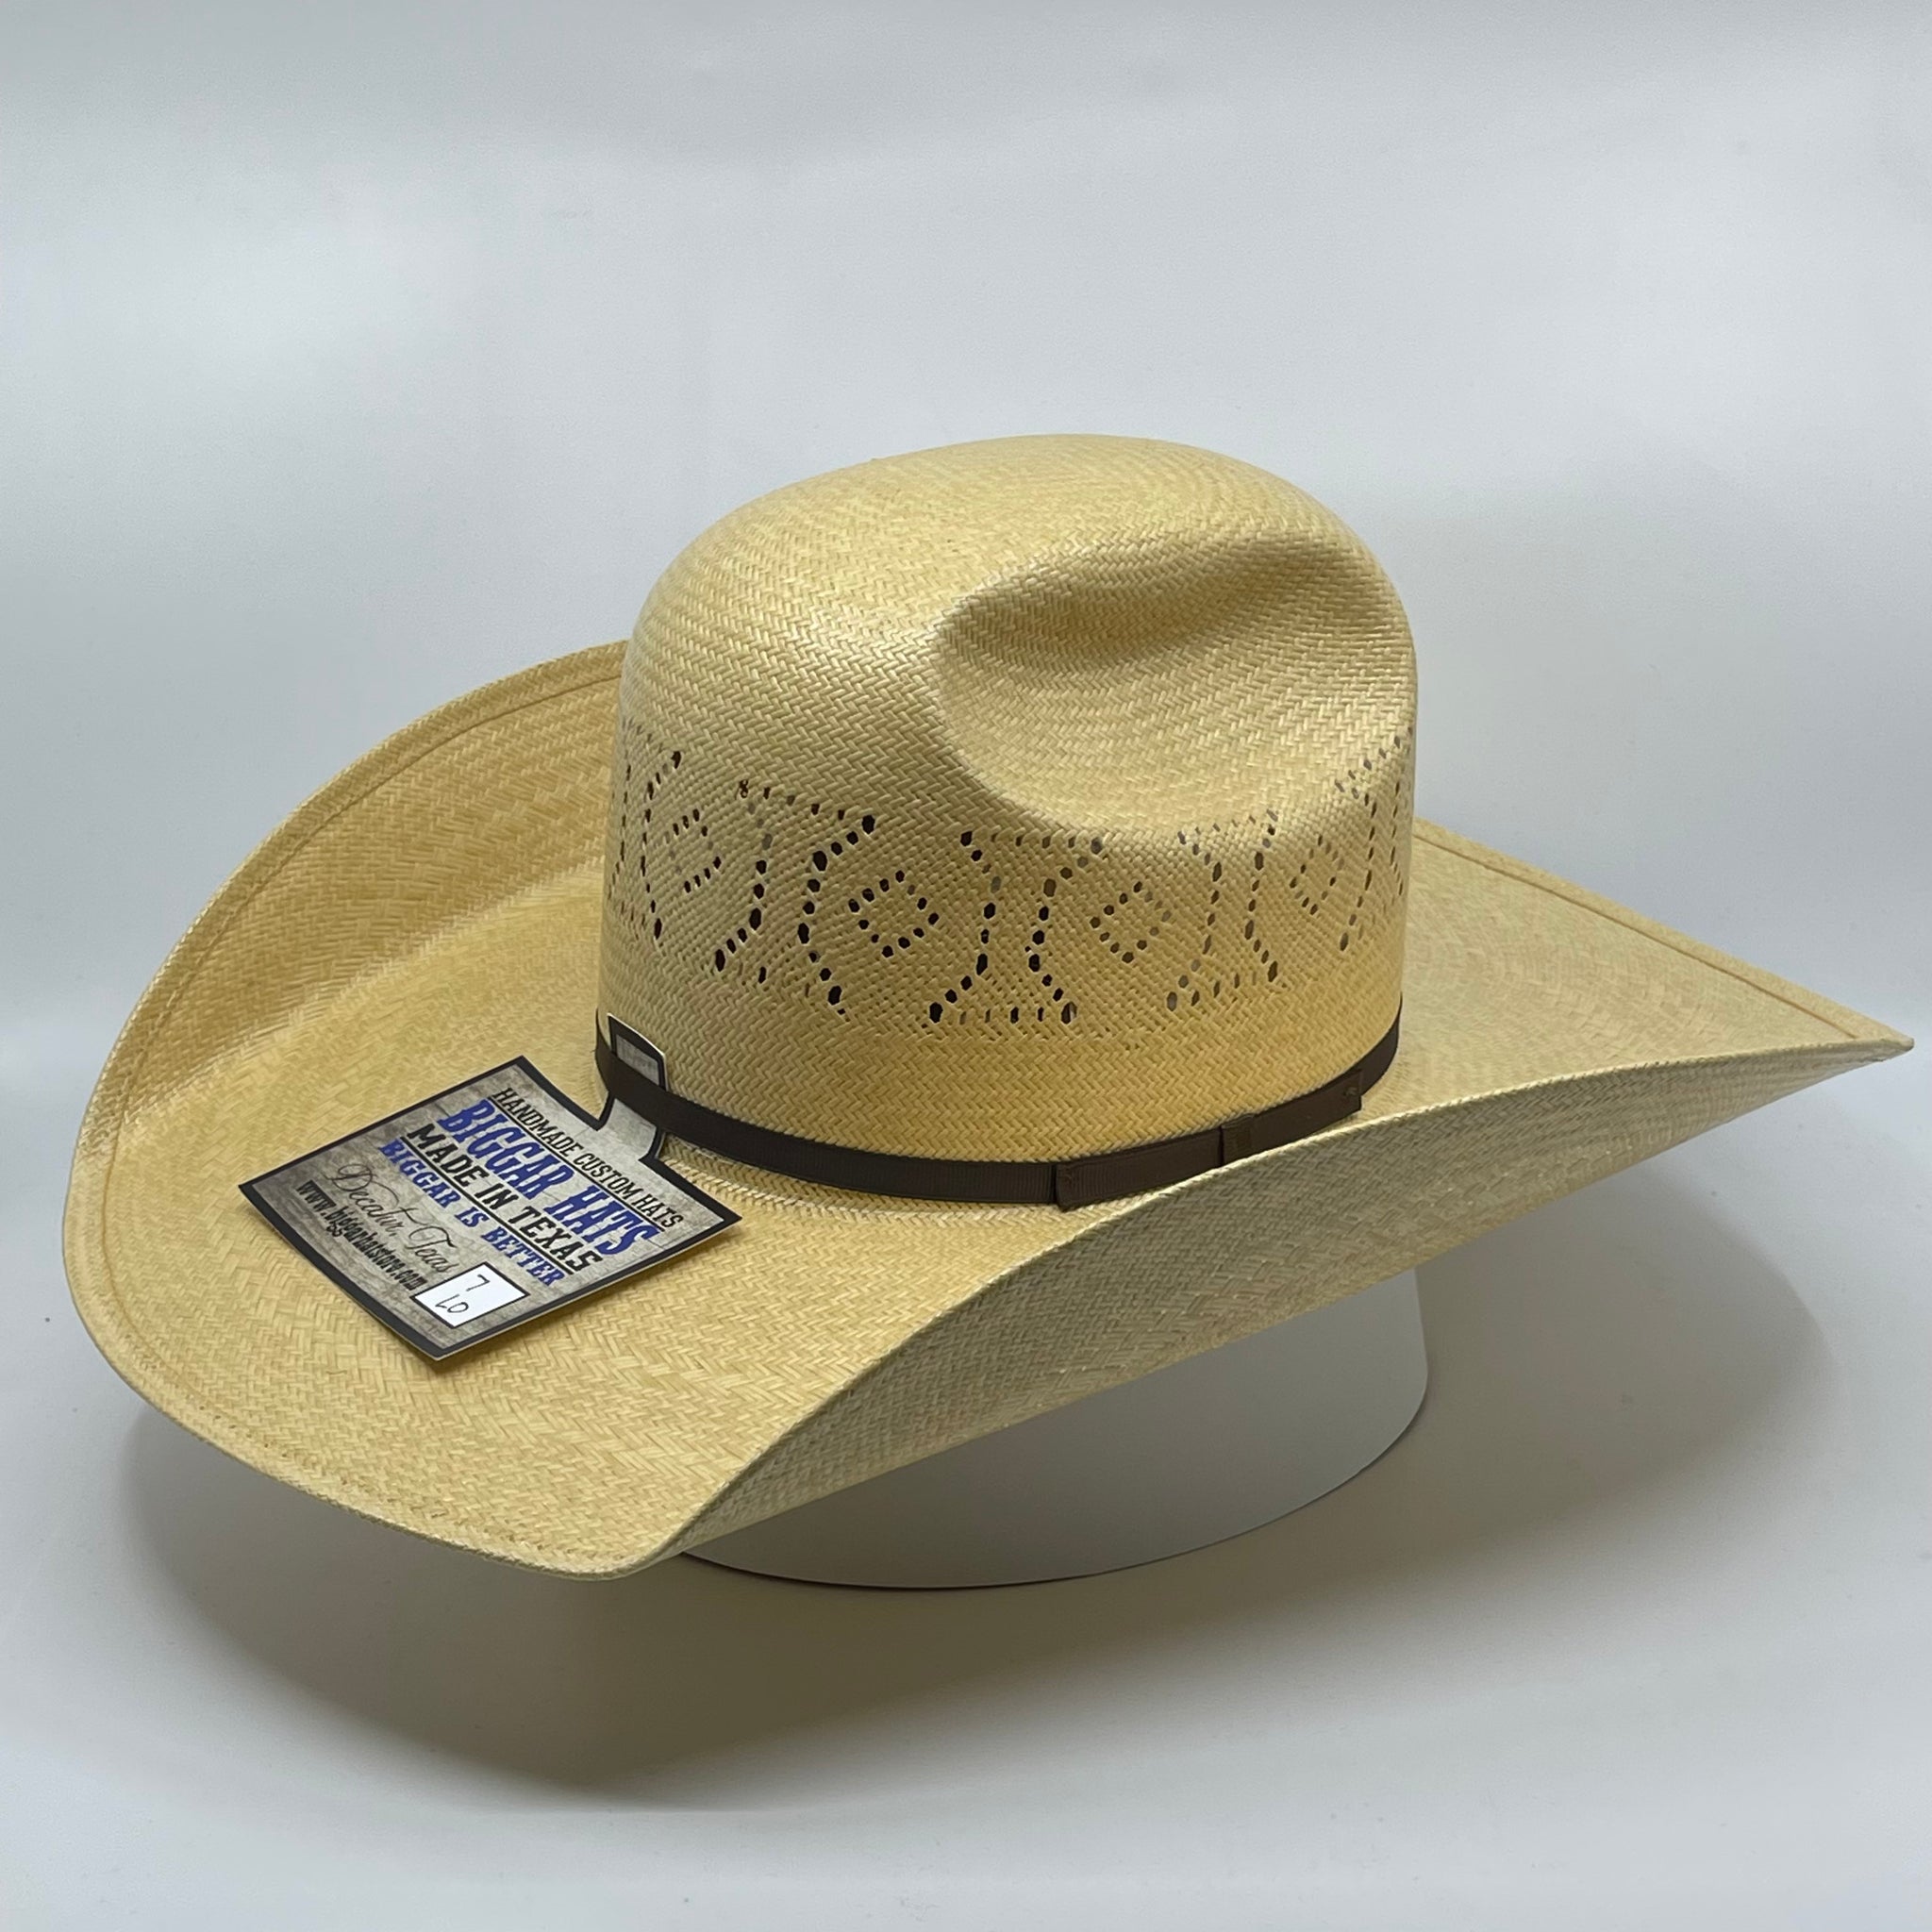 The Western Hats of HPG